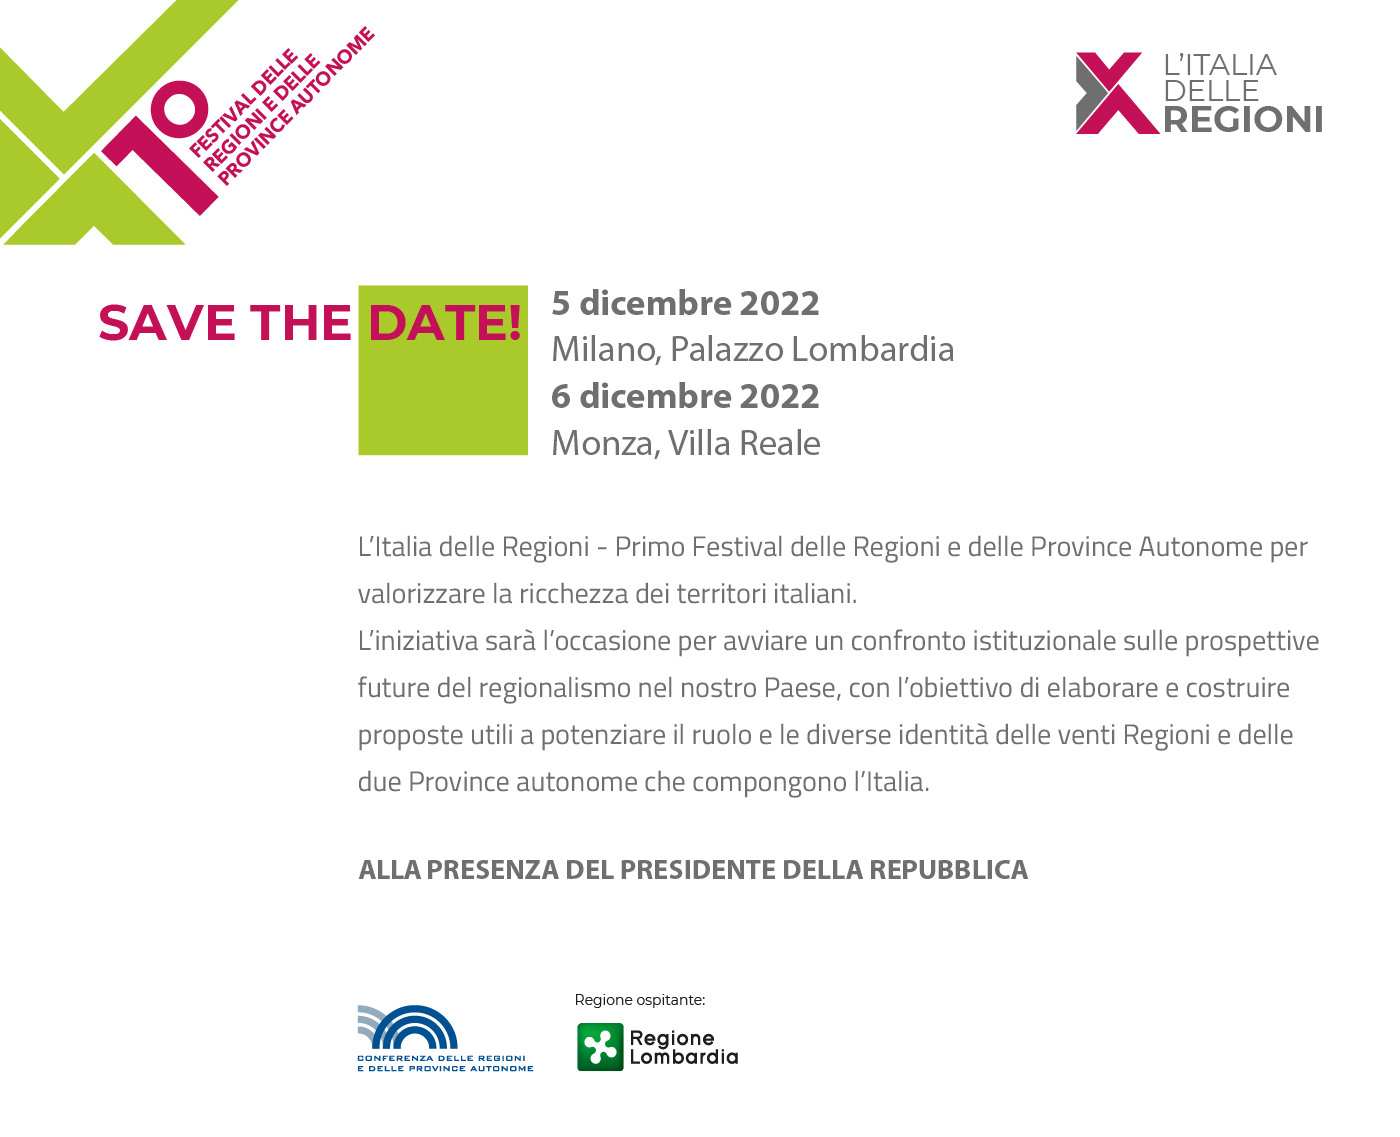 file/ELEMENTO_NEWSLETTER/24927/Save-the-date_UFFICIALE_festival_regioni_5_6_12_22_NL.png